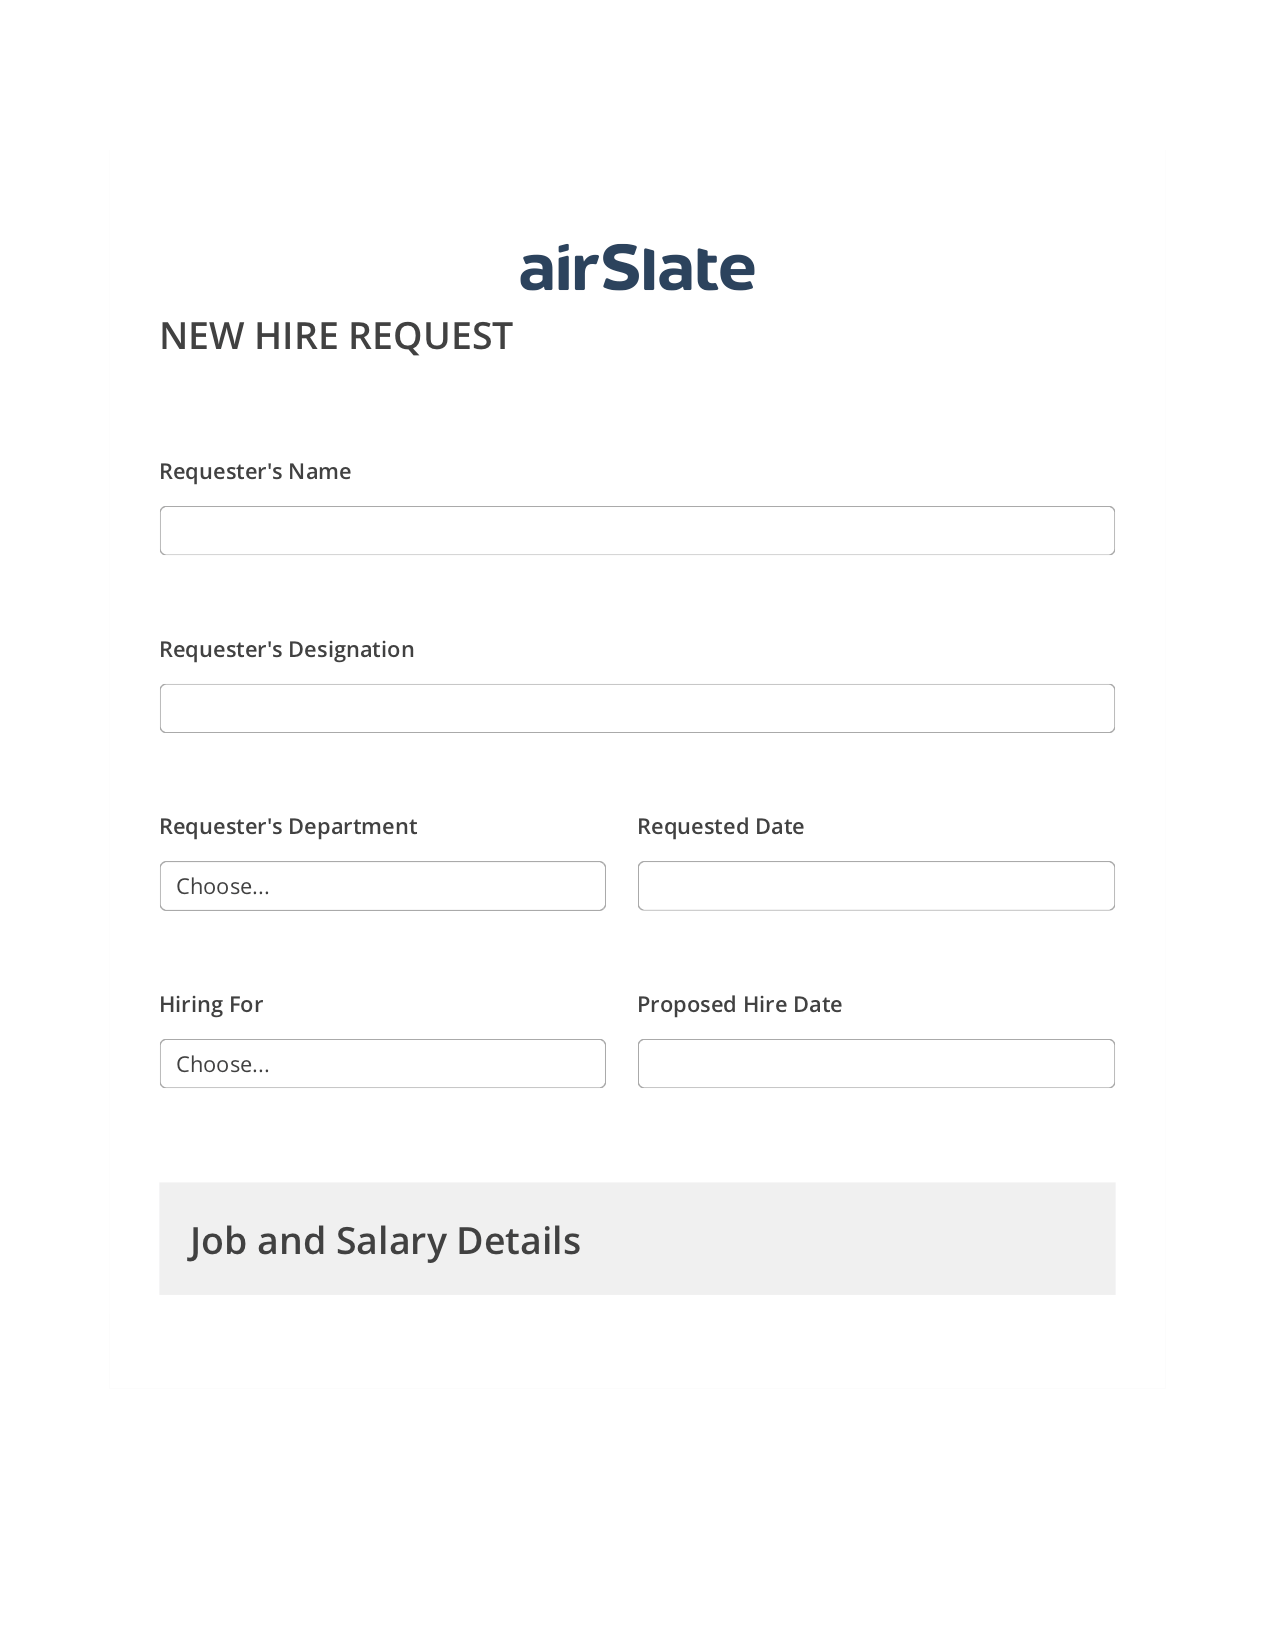 Hiring Request Workflow Pre-fill from Google Sheets Bot, Revoke Access Bot, Export to WebMerge Bot